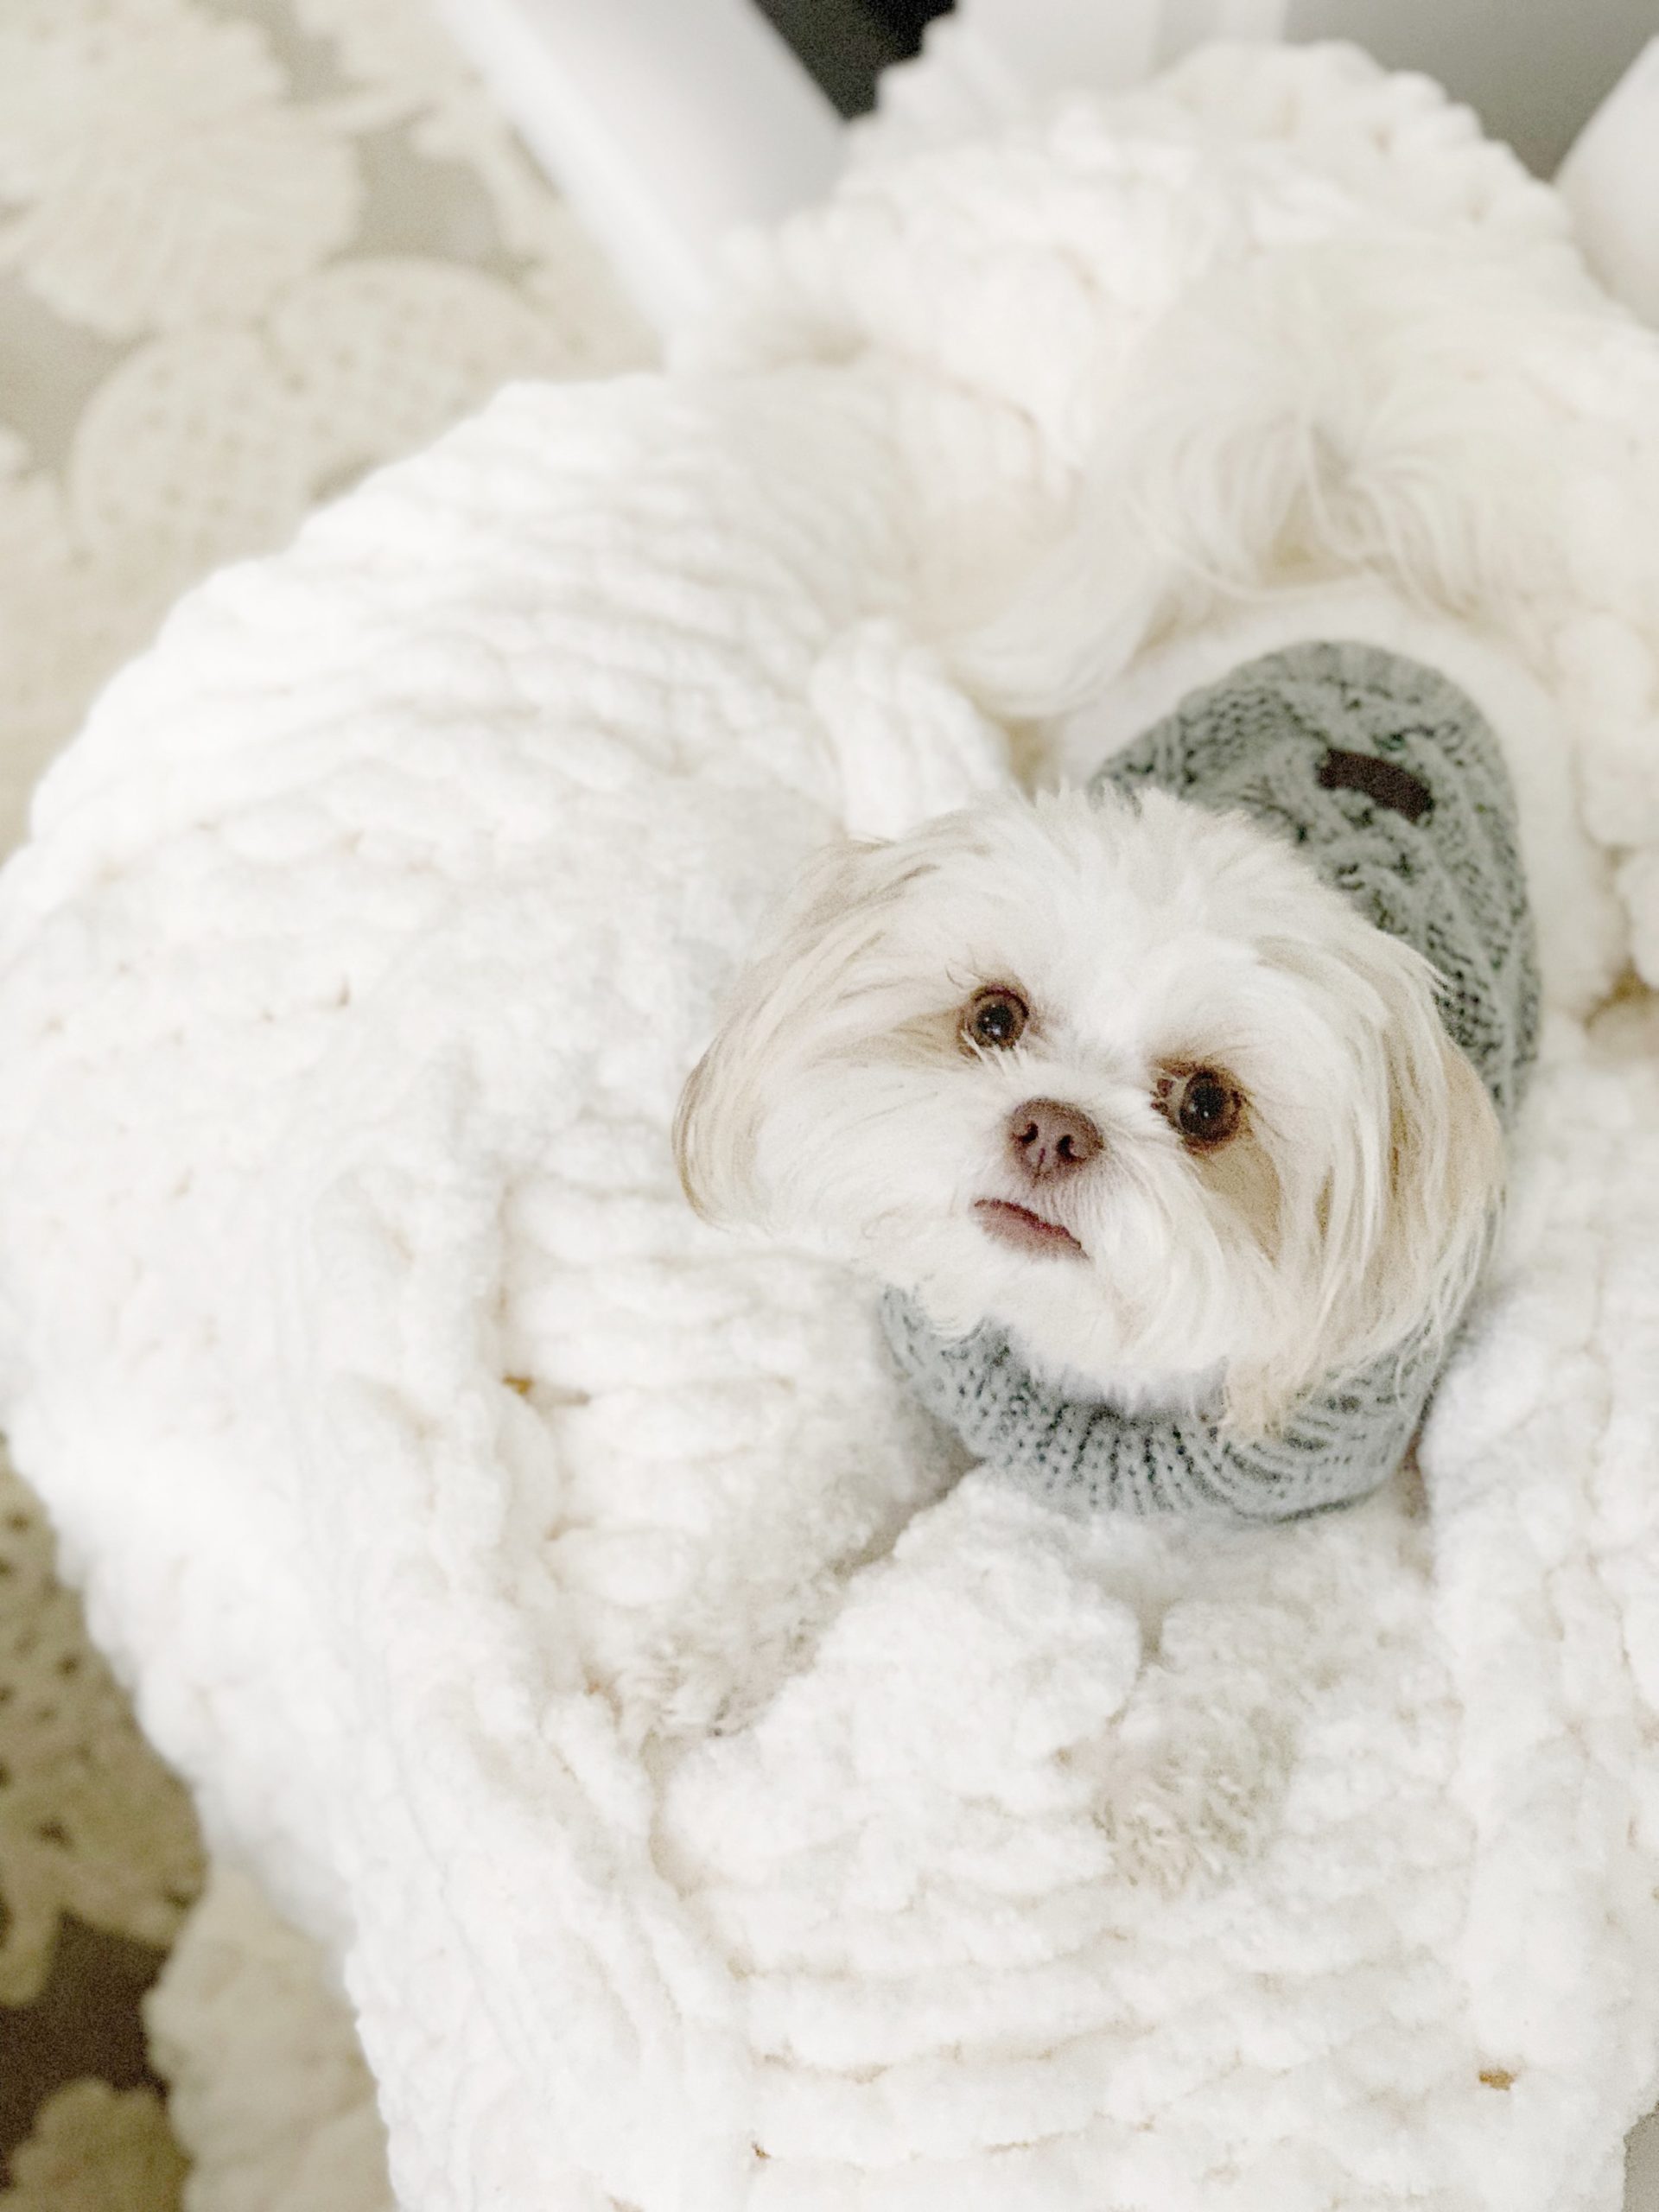 bed bath and beyond ugg dog sweater